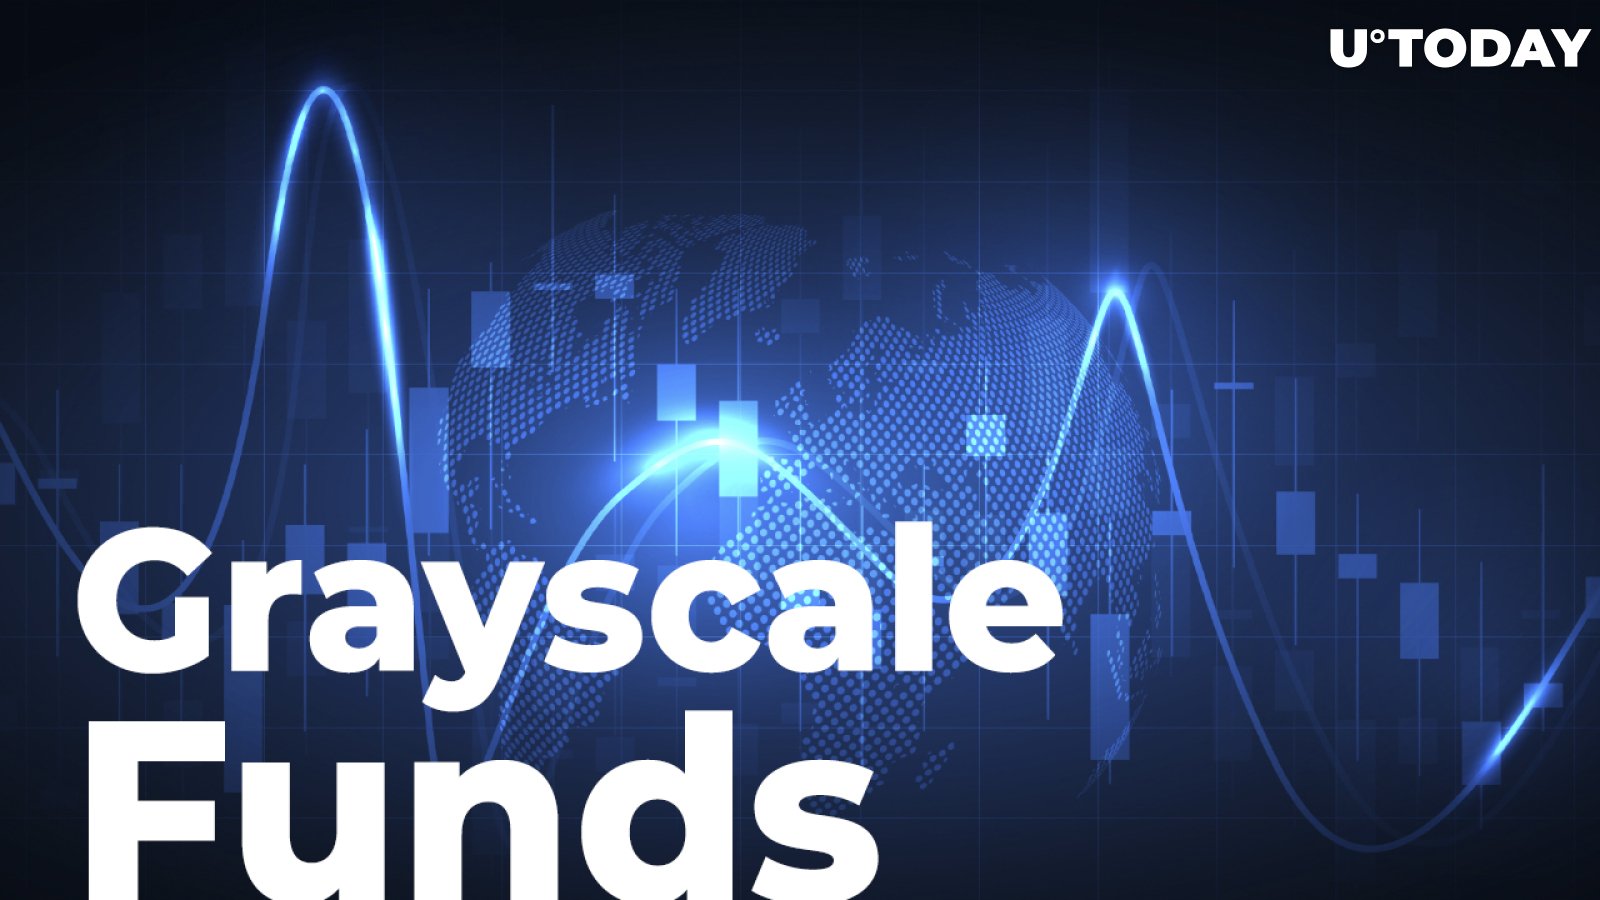 Grayscale Funds Still Trade with Negative Premium, Here's What It Means